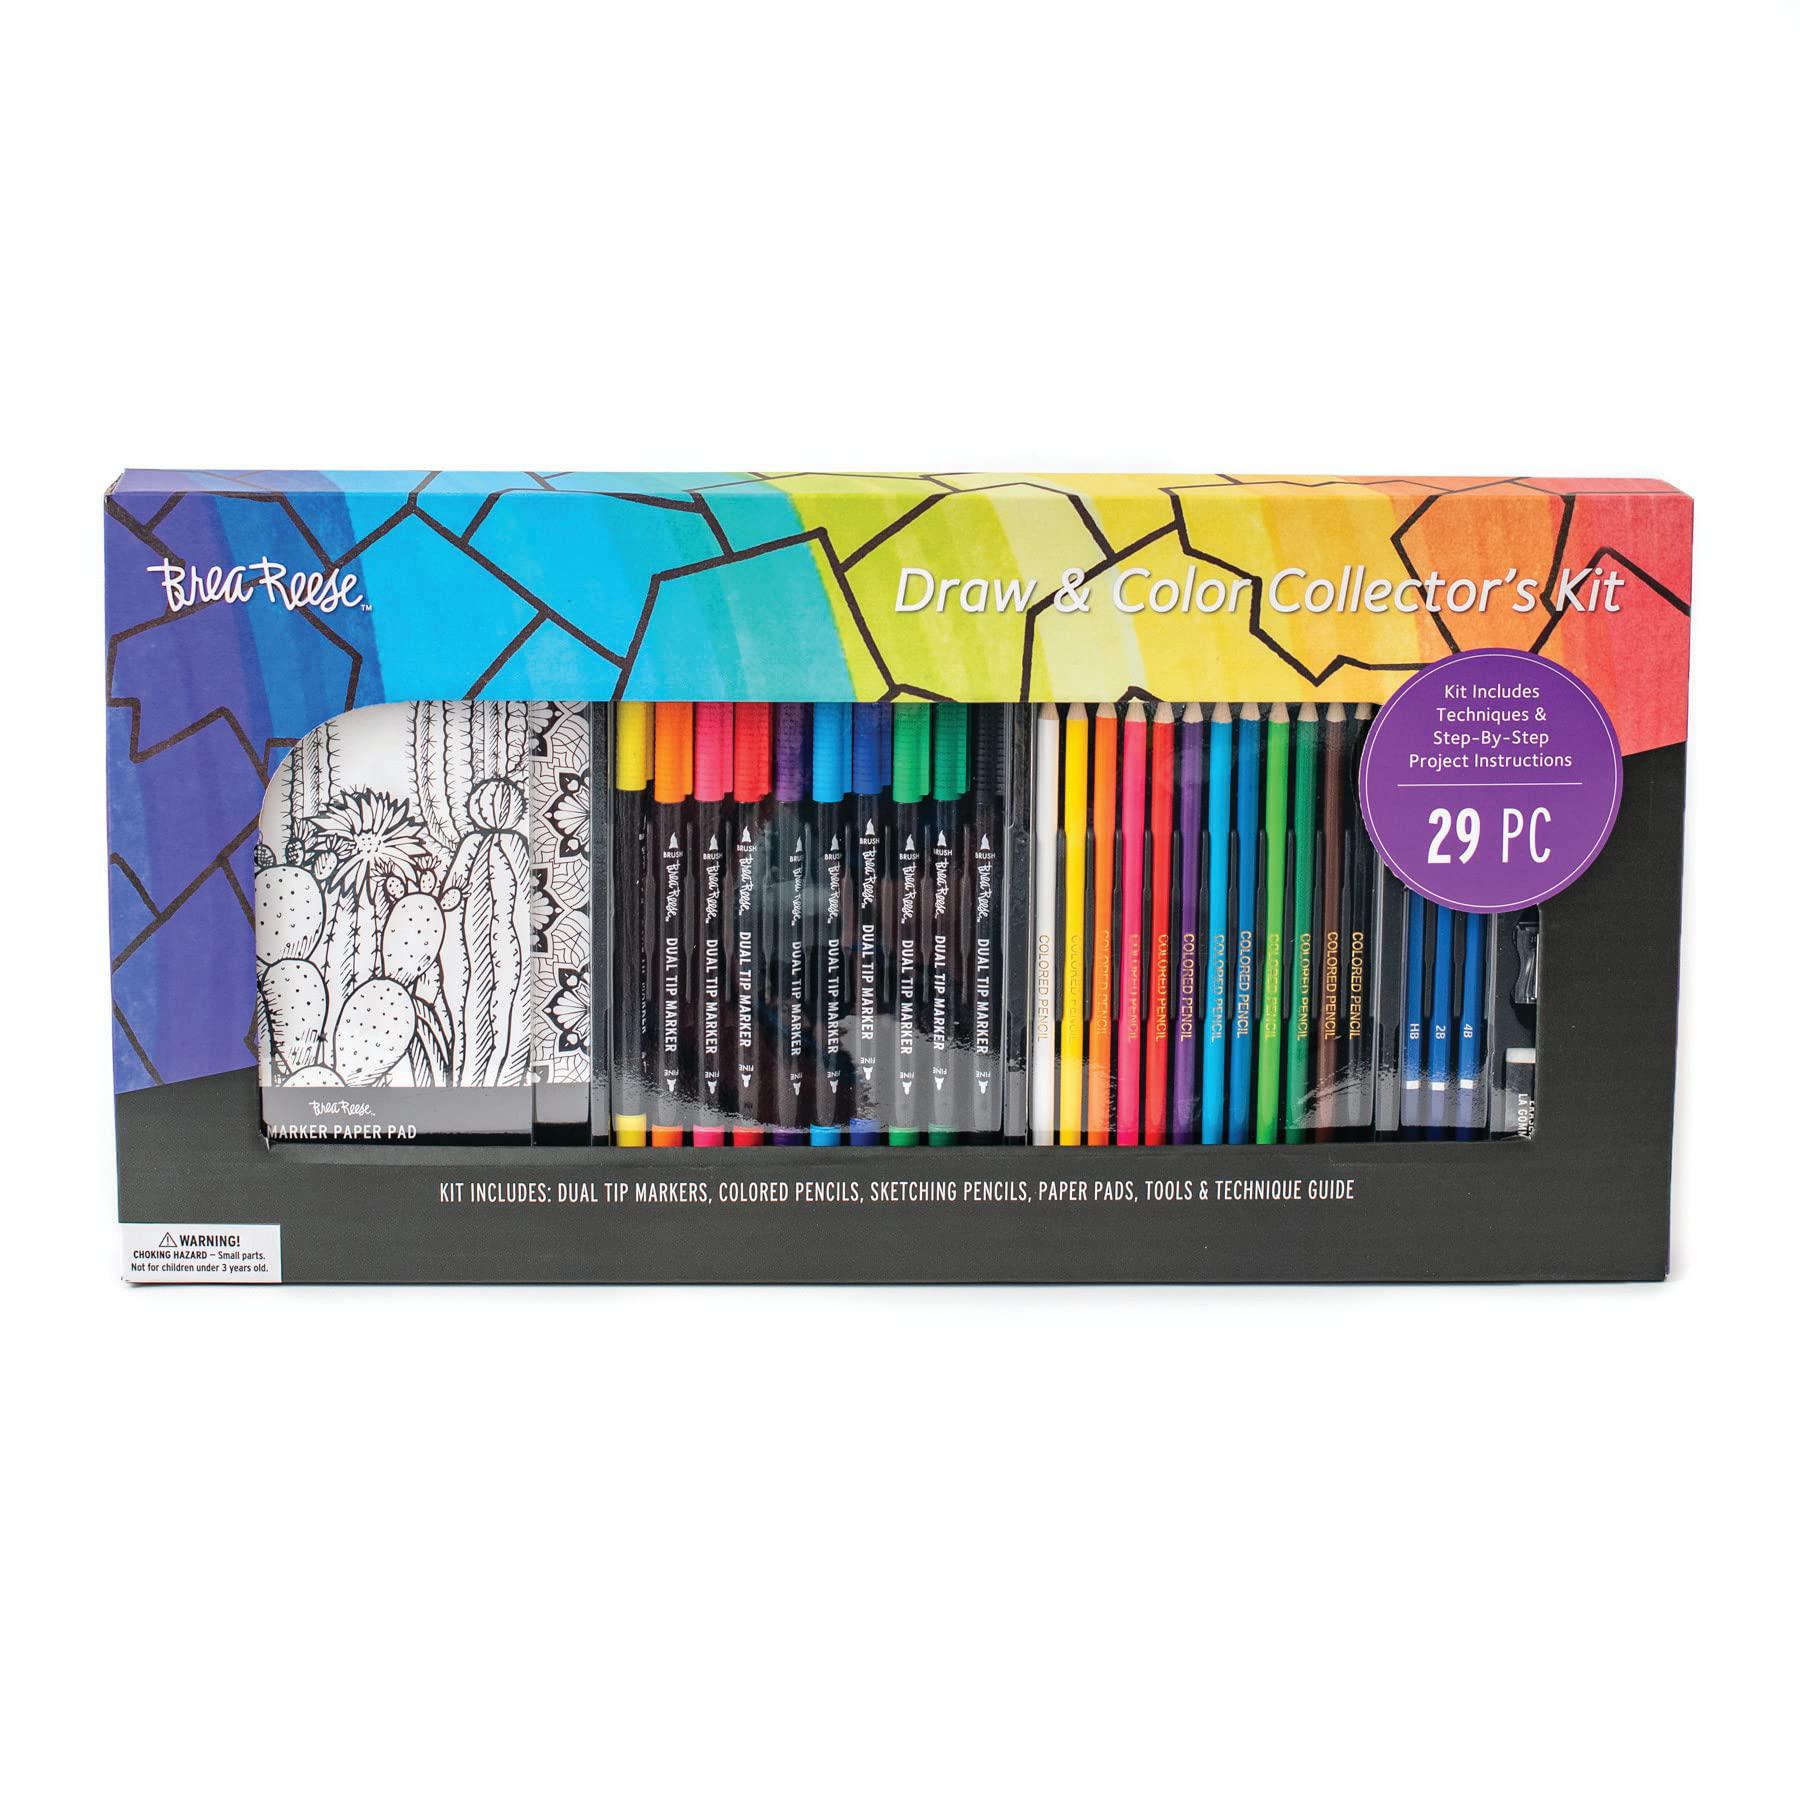 brea reese drawing & color collector's kit art, multicolored